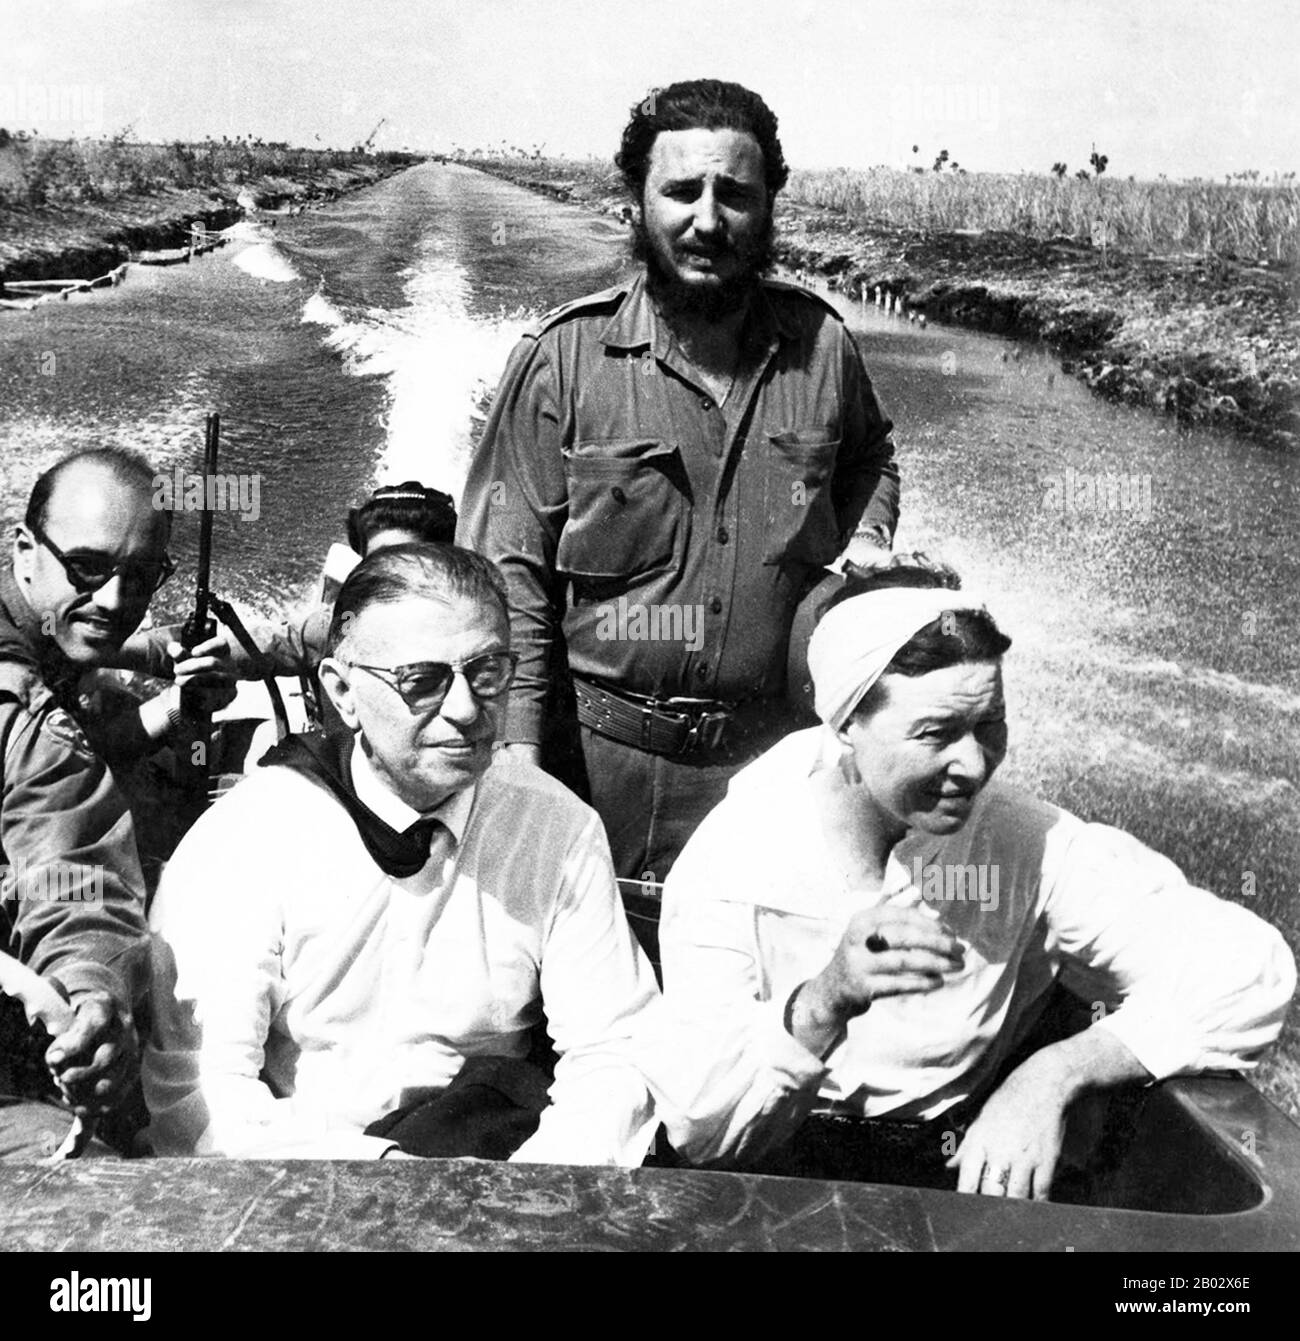 In 1960, Jean-Paul Sartre and Simone de Beauvoir visited Cuba during, as Sartre wrote, the 'honeymoon of the revolution'. Military strongman Fulgencio Batista’s regime had fallen to Fidel Castro’s guerilla army and the whole country was alight with revolutionary zeal.  When the couple returned to Paris, Sartre wrote numerous articles extolling the revolution. De Beauvoir, who was equally impressed, wrote, 'For the first time in our lives, we were witnessing happiness that had been attained by violence'.  De Beauvoir and Sartre would ultimately denounce Castro in an open letter that criticized Stock Photo